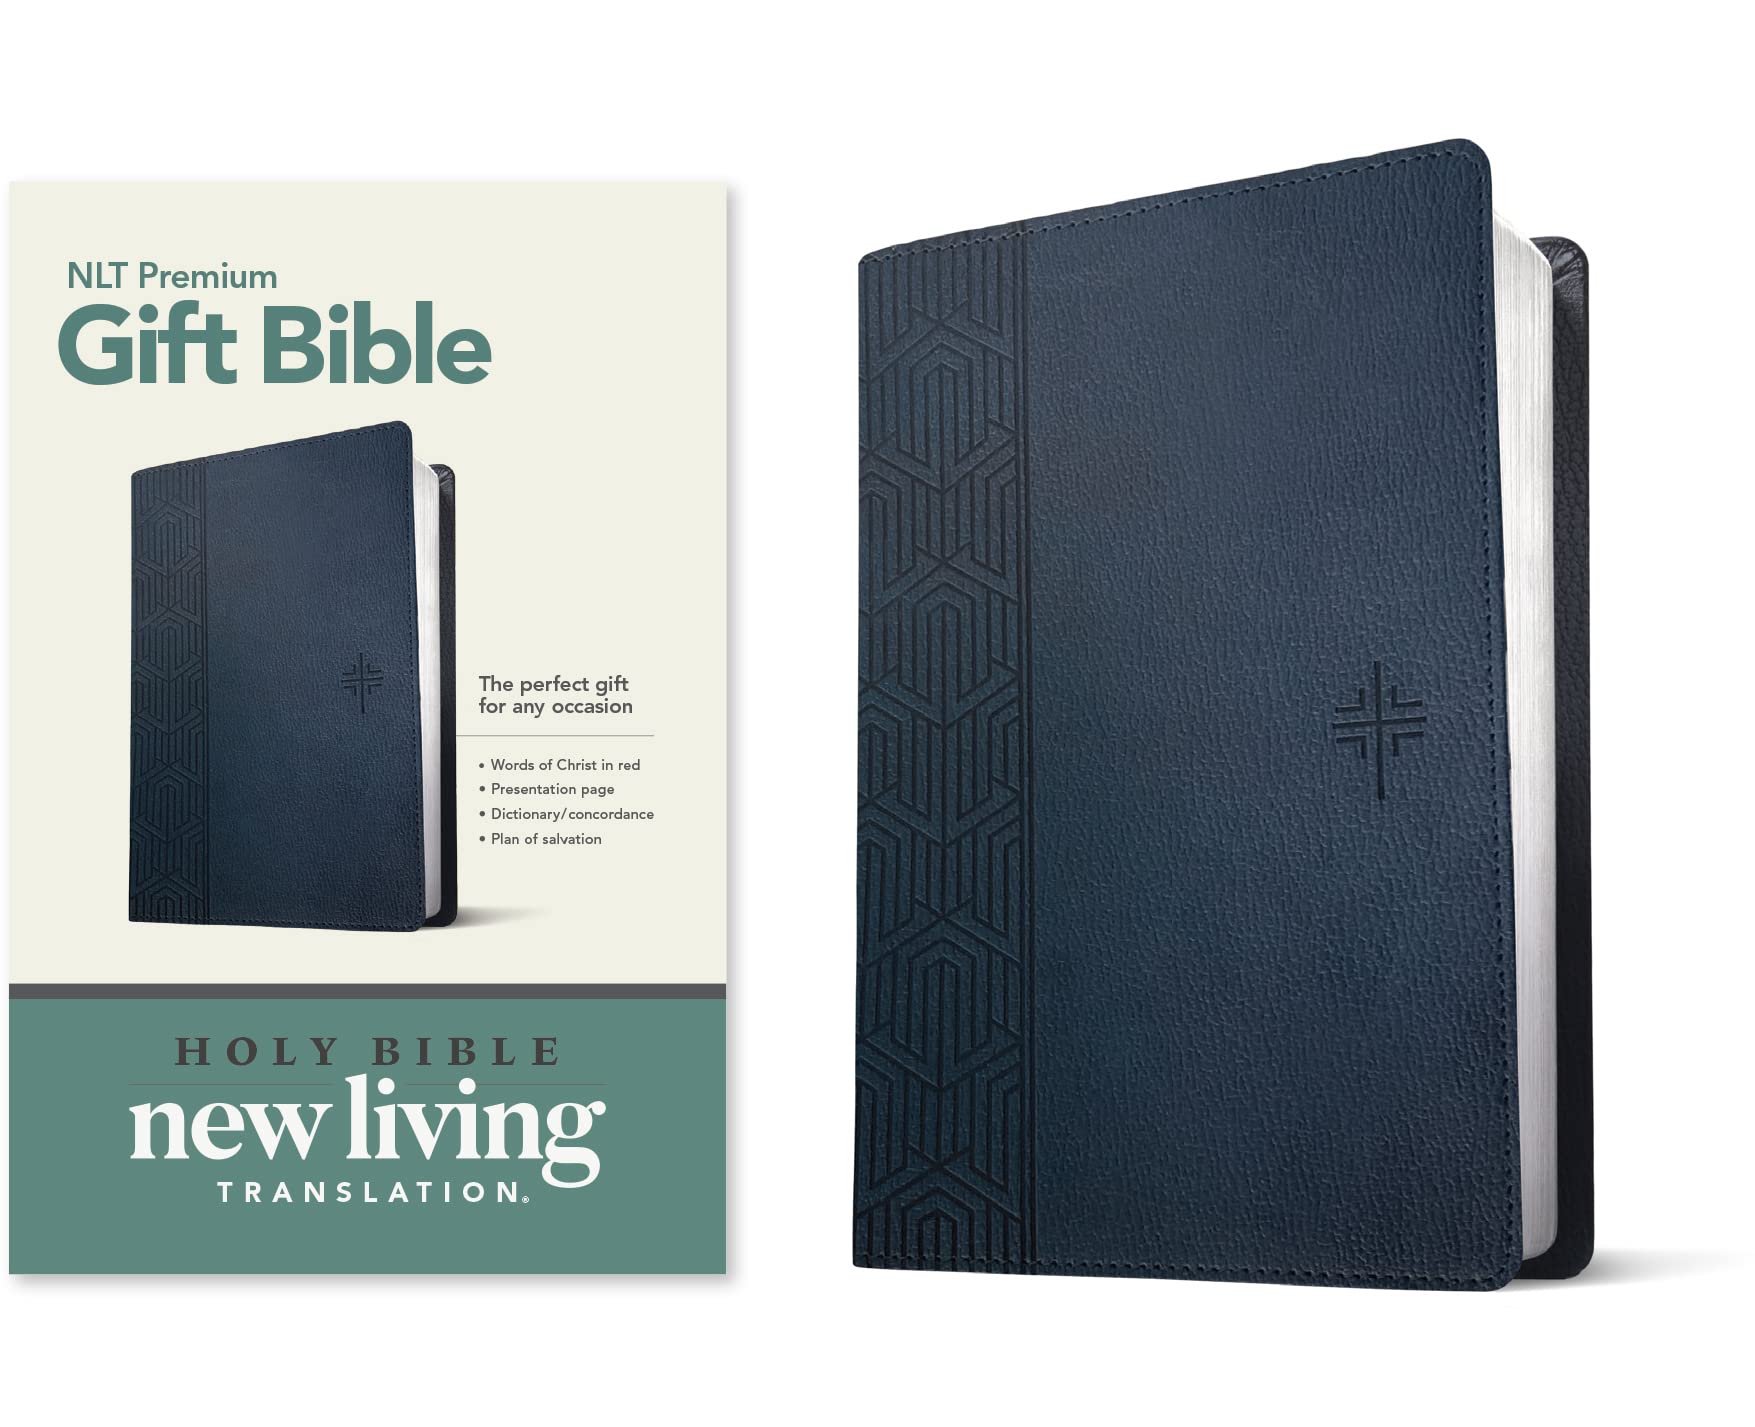 NLT Premium Gift Bible, Leather-look Blue